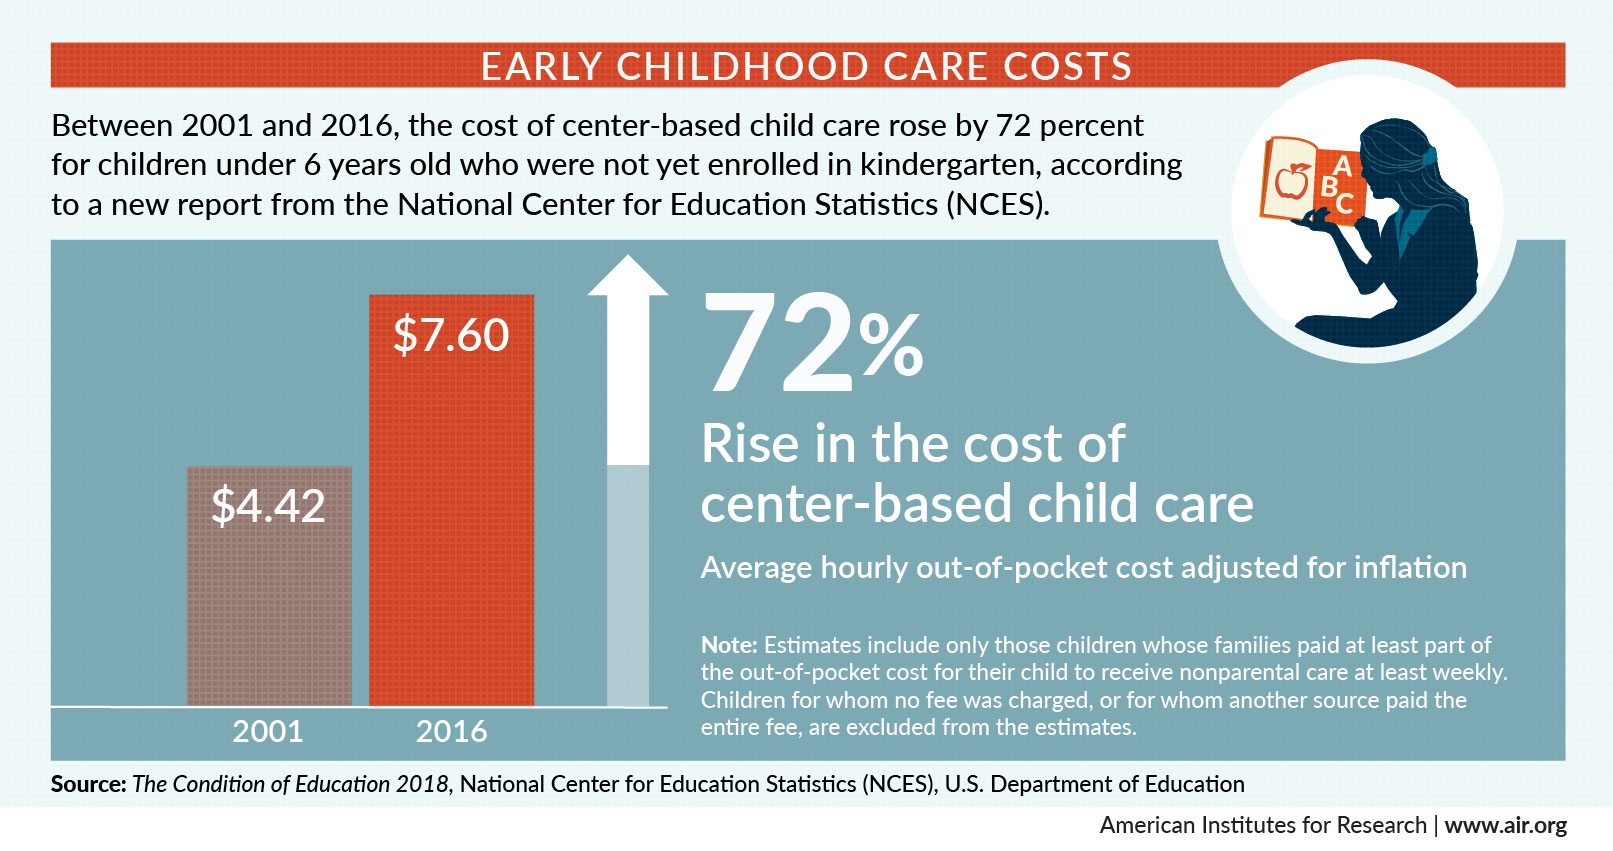 Infographic: Early Childhood Care Costs from the Condition of Education